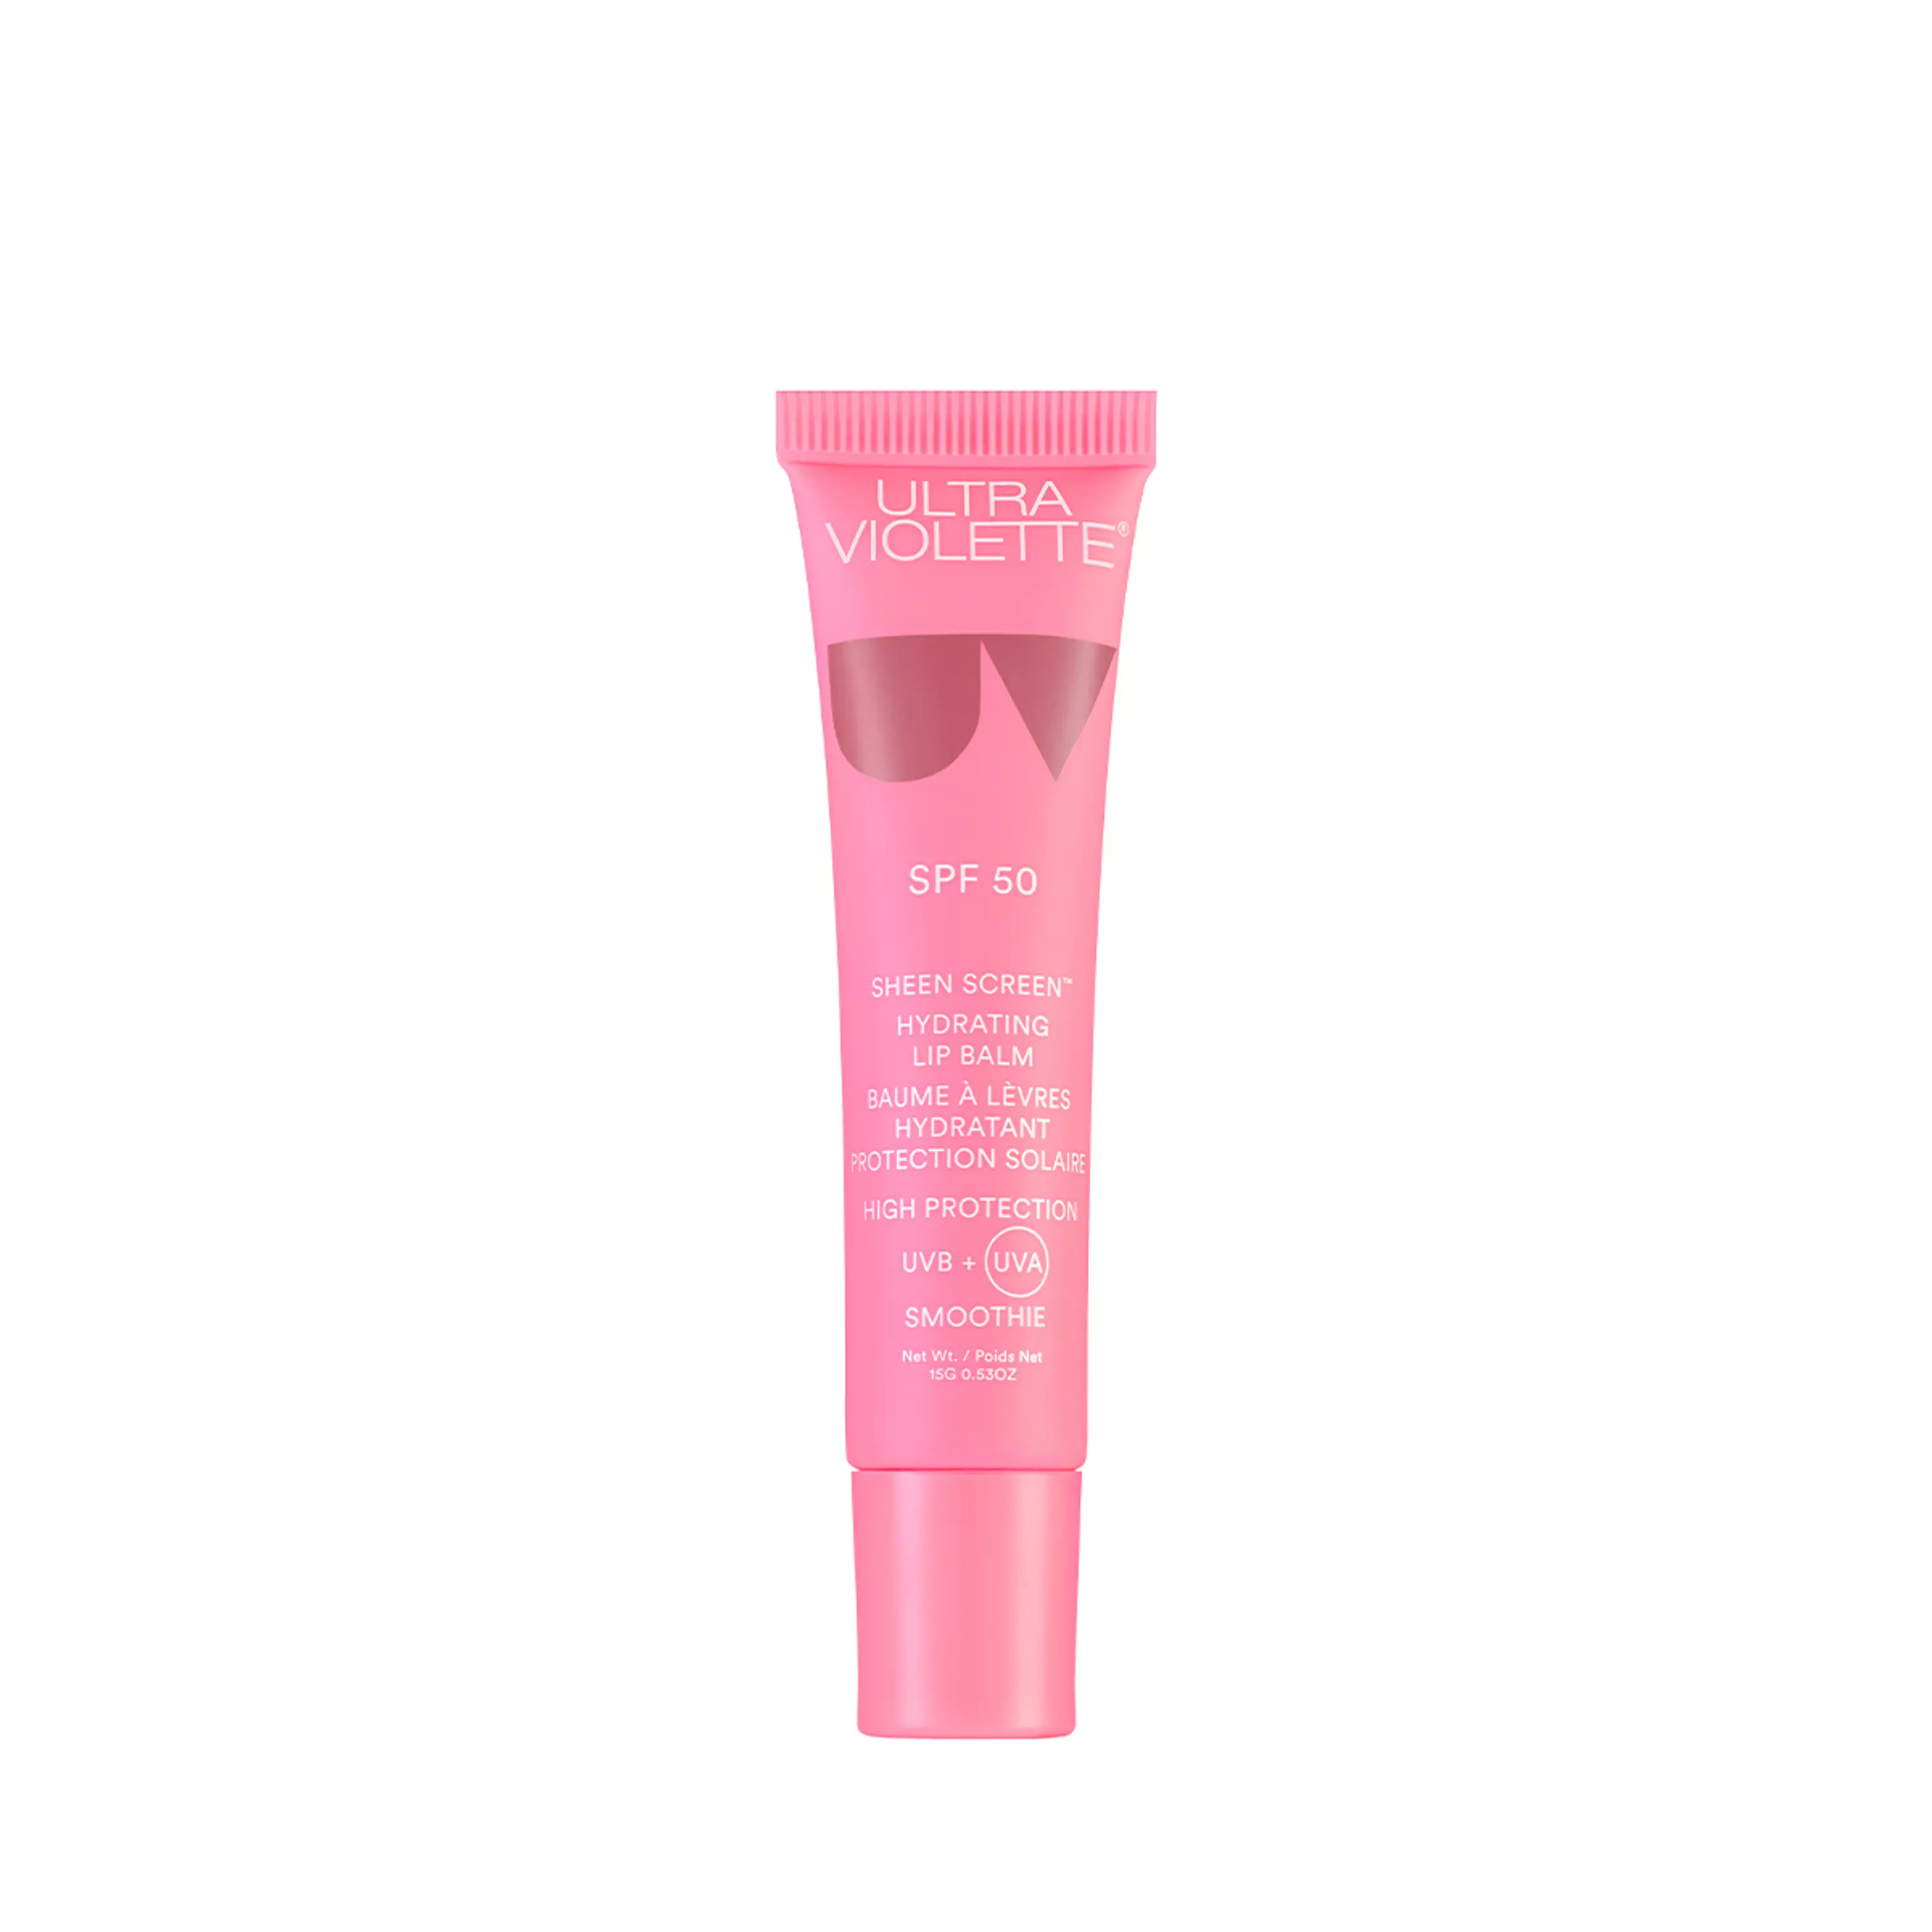 Ultra Violette - Smoothie - Sheen Screen Hydrating Lip Balm SPF 50